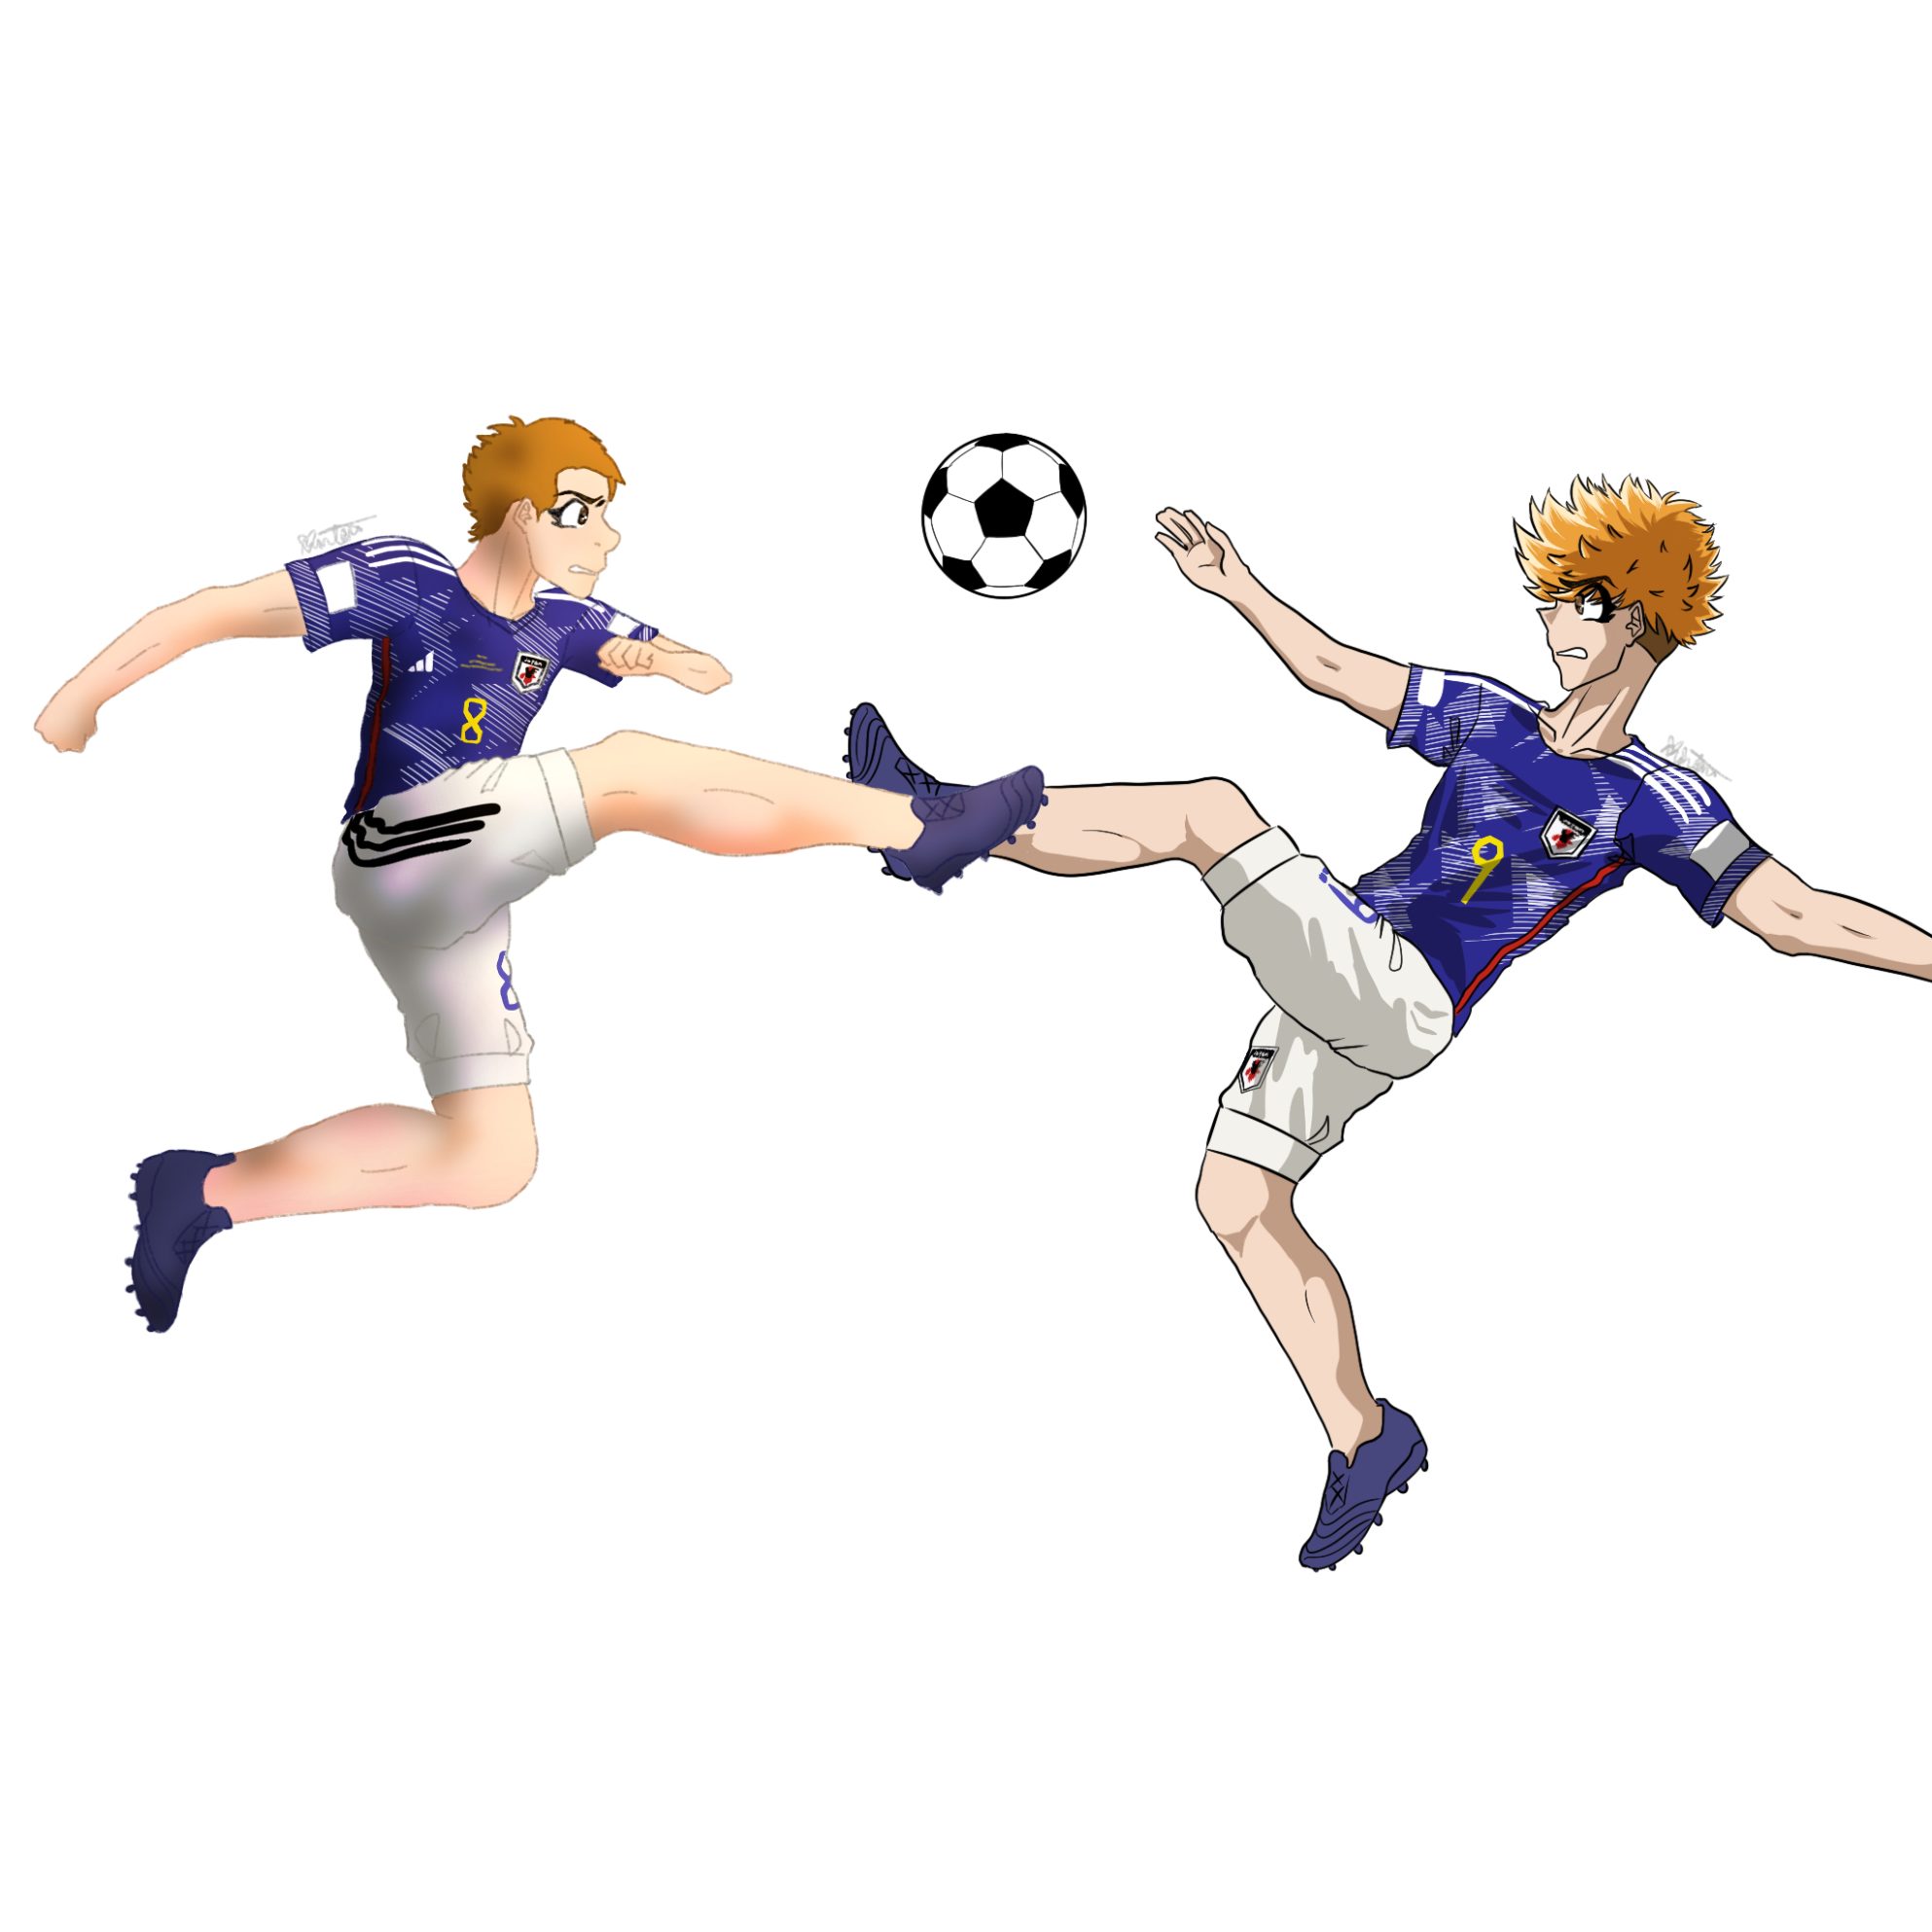 Japanese soccer player  Ritsu Doan clashes with Blue Lock character Rensuke Kunigami. They are often compared to each other.